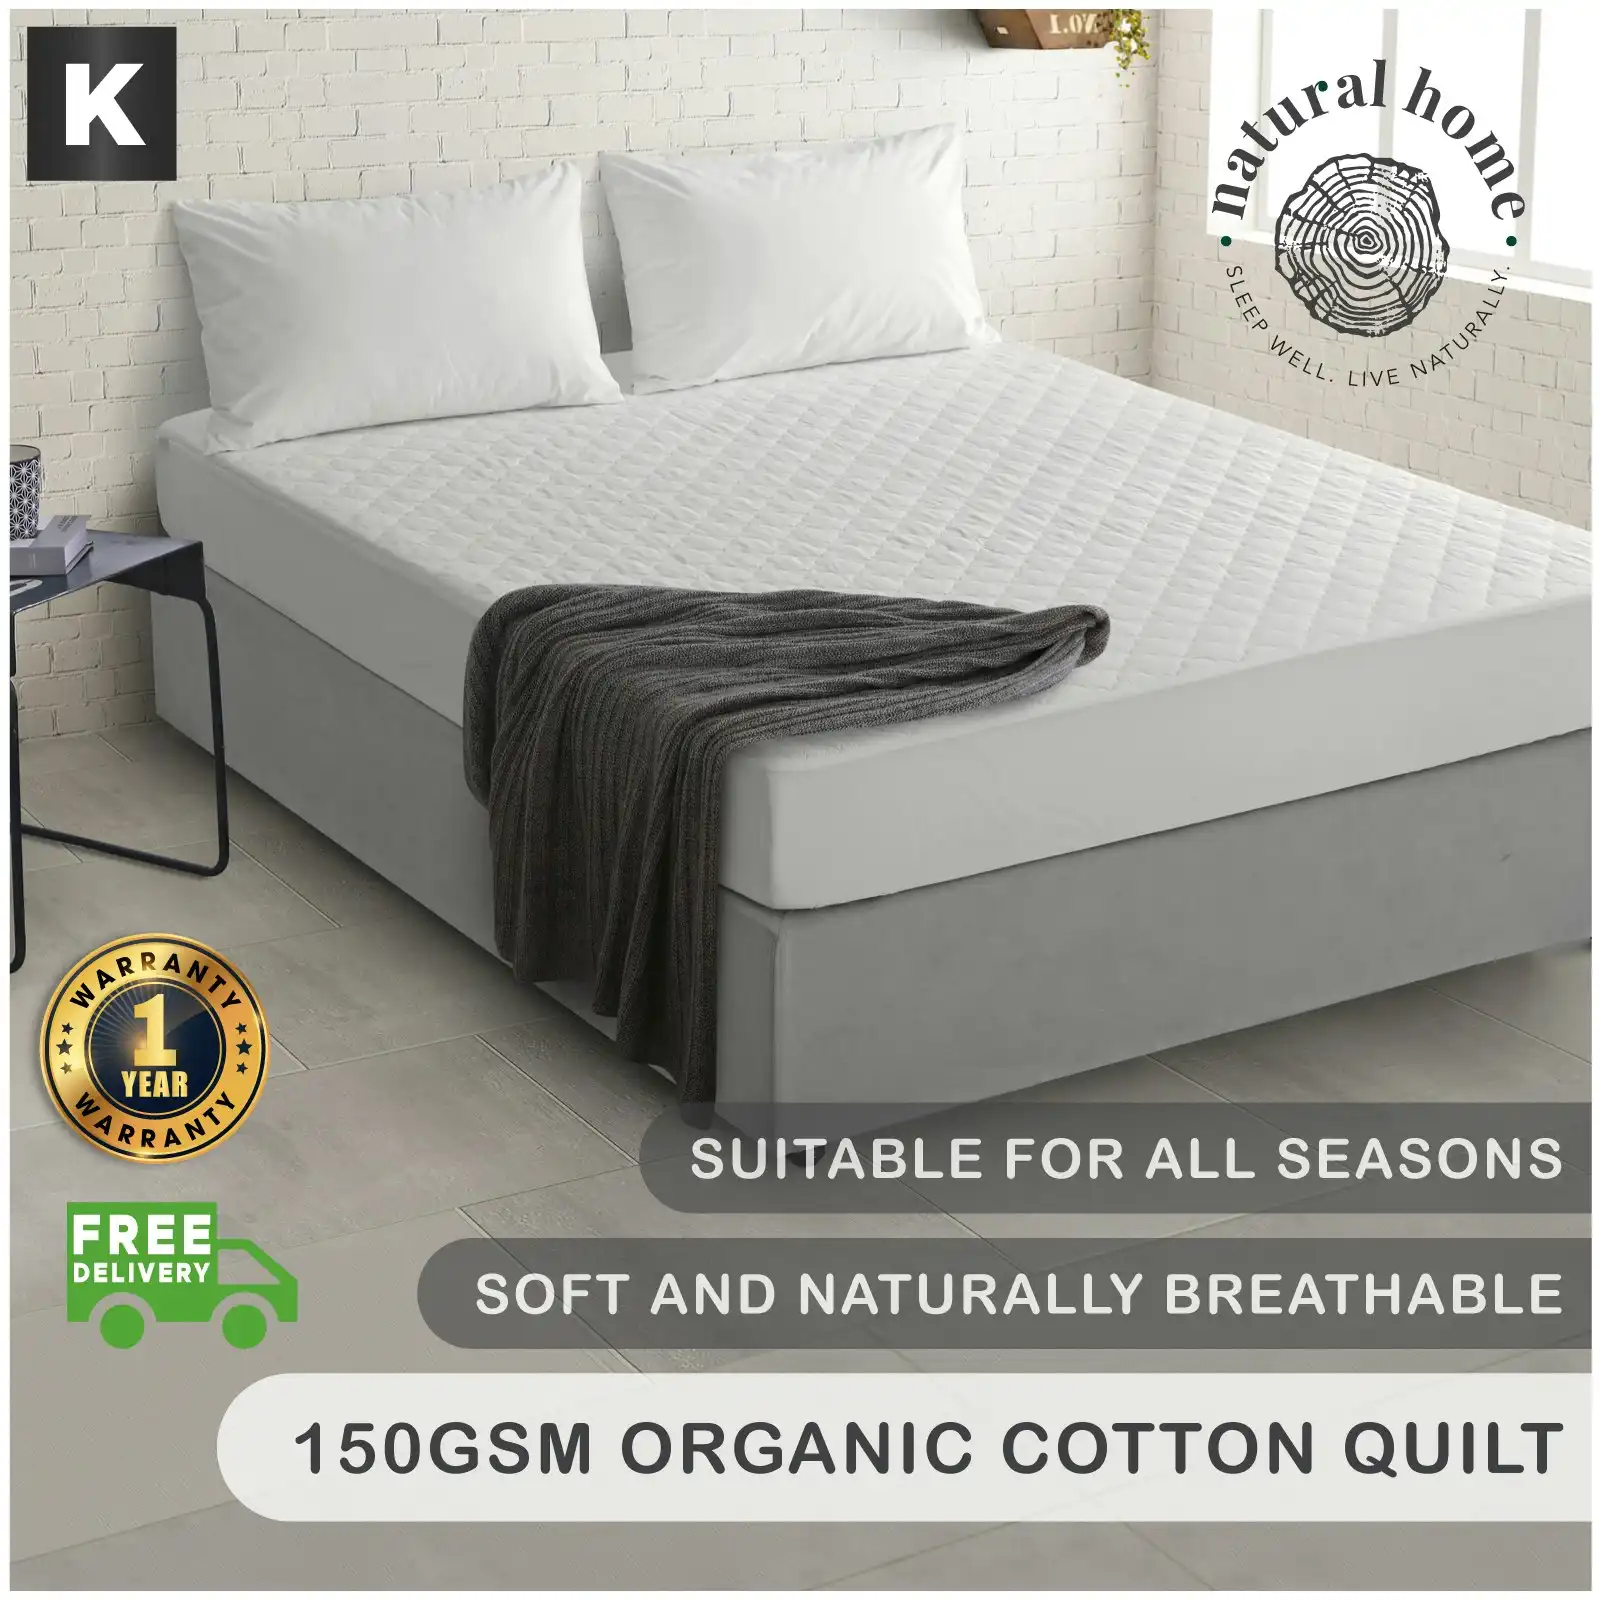 Natural Home Organic Cotton Quilted Mattress Protector White King Bed